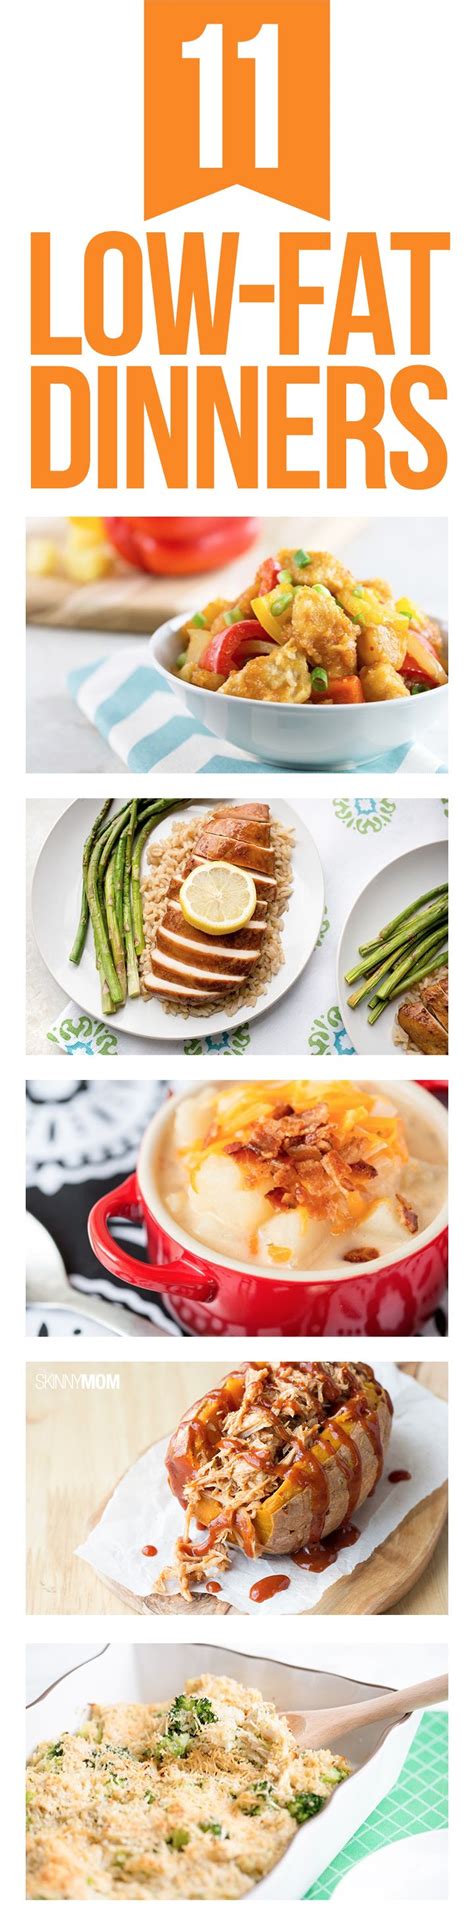 I've spent a lot of time over the last few months searching for recipes that are cholesterol friendly and still taste good. Pin on Healthy Food + Recipes